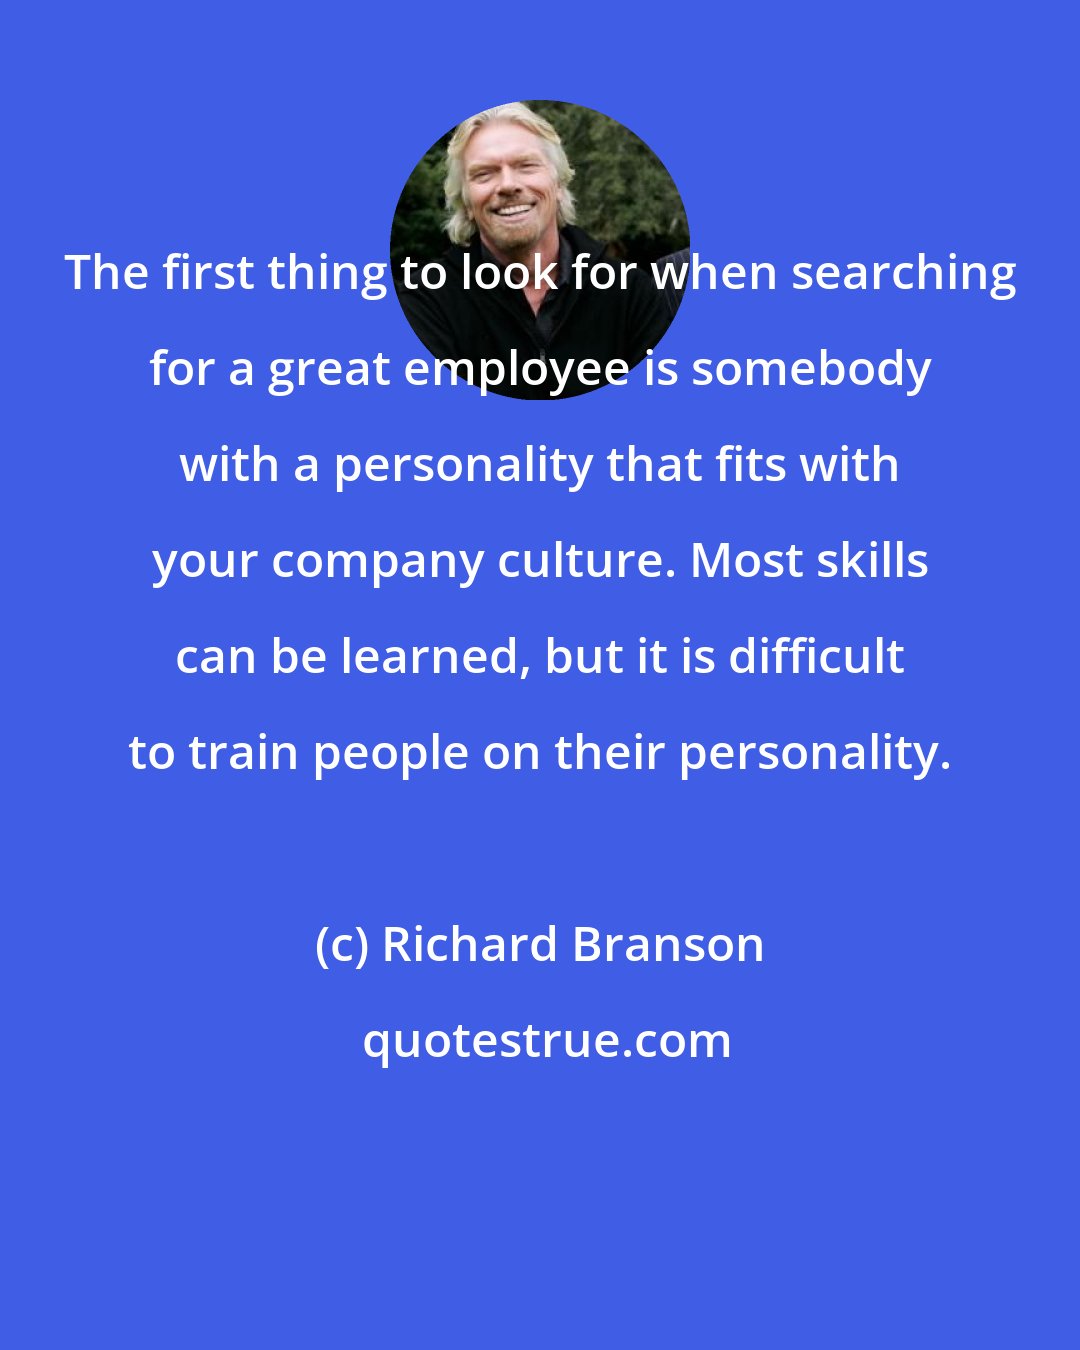 Richard Branson: The first thing to look for when searching for a great employee is somebody with a personality that fits with your company culture. Most skills can be learned, but it is difficult to train people on their personality.